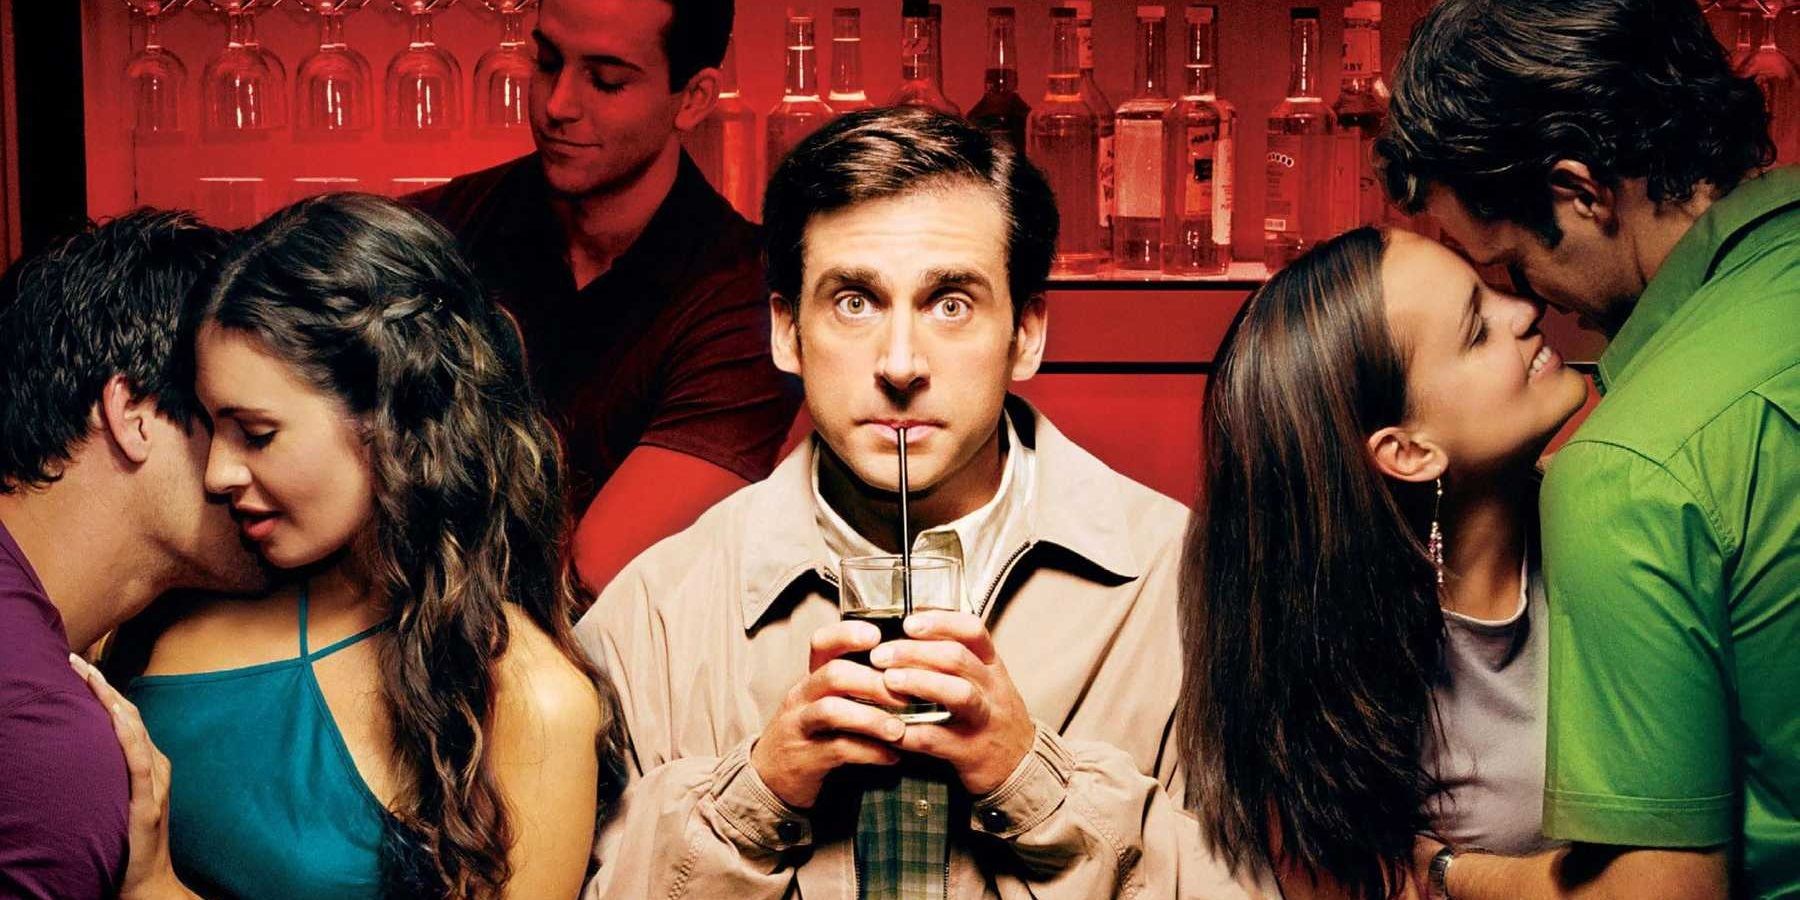 Steve Carell on The 40-Year-Old Virgin poster